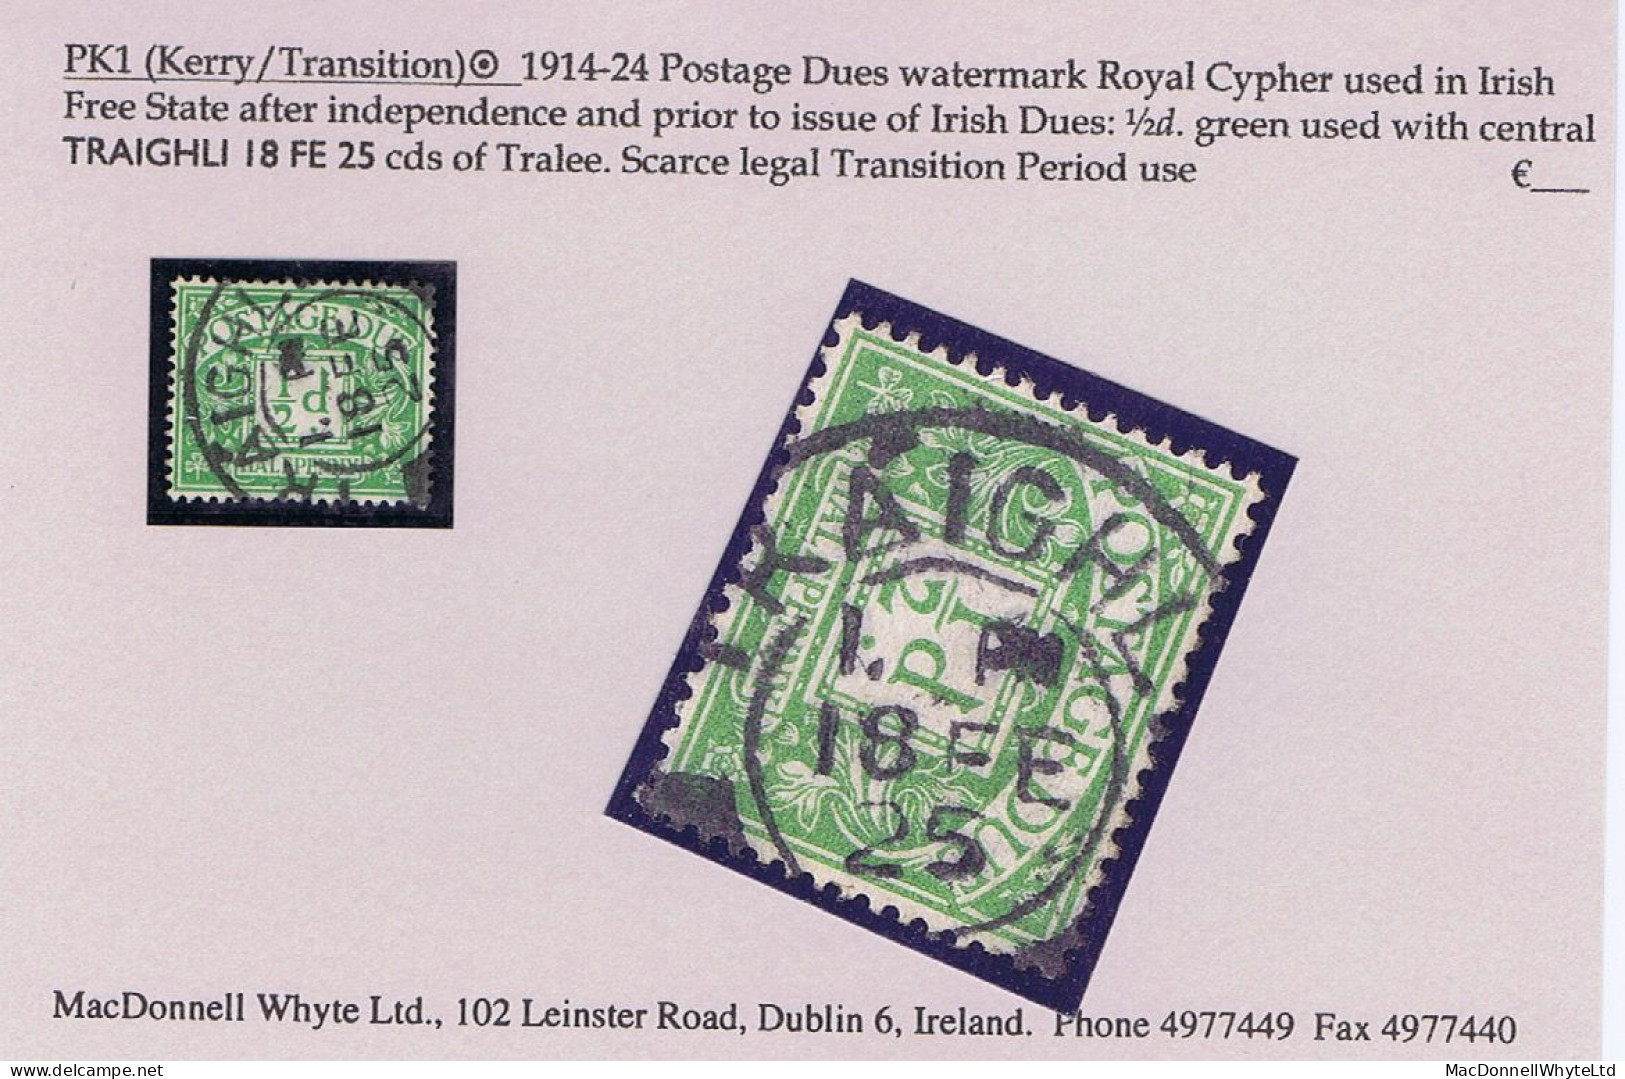 Ireland Postage Due Transition Kerry 1925 Great Britain Halfpenny Green Tralee Cds In Irish TRAIGHLI 18 FE 25 - Postage Due